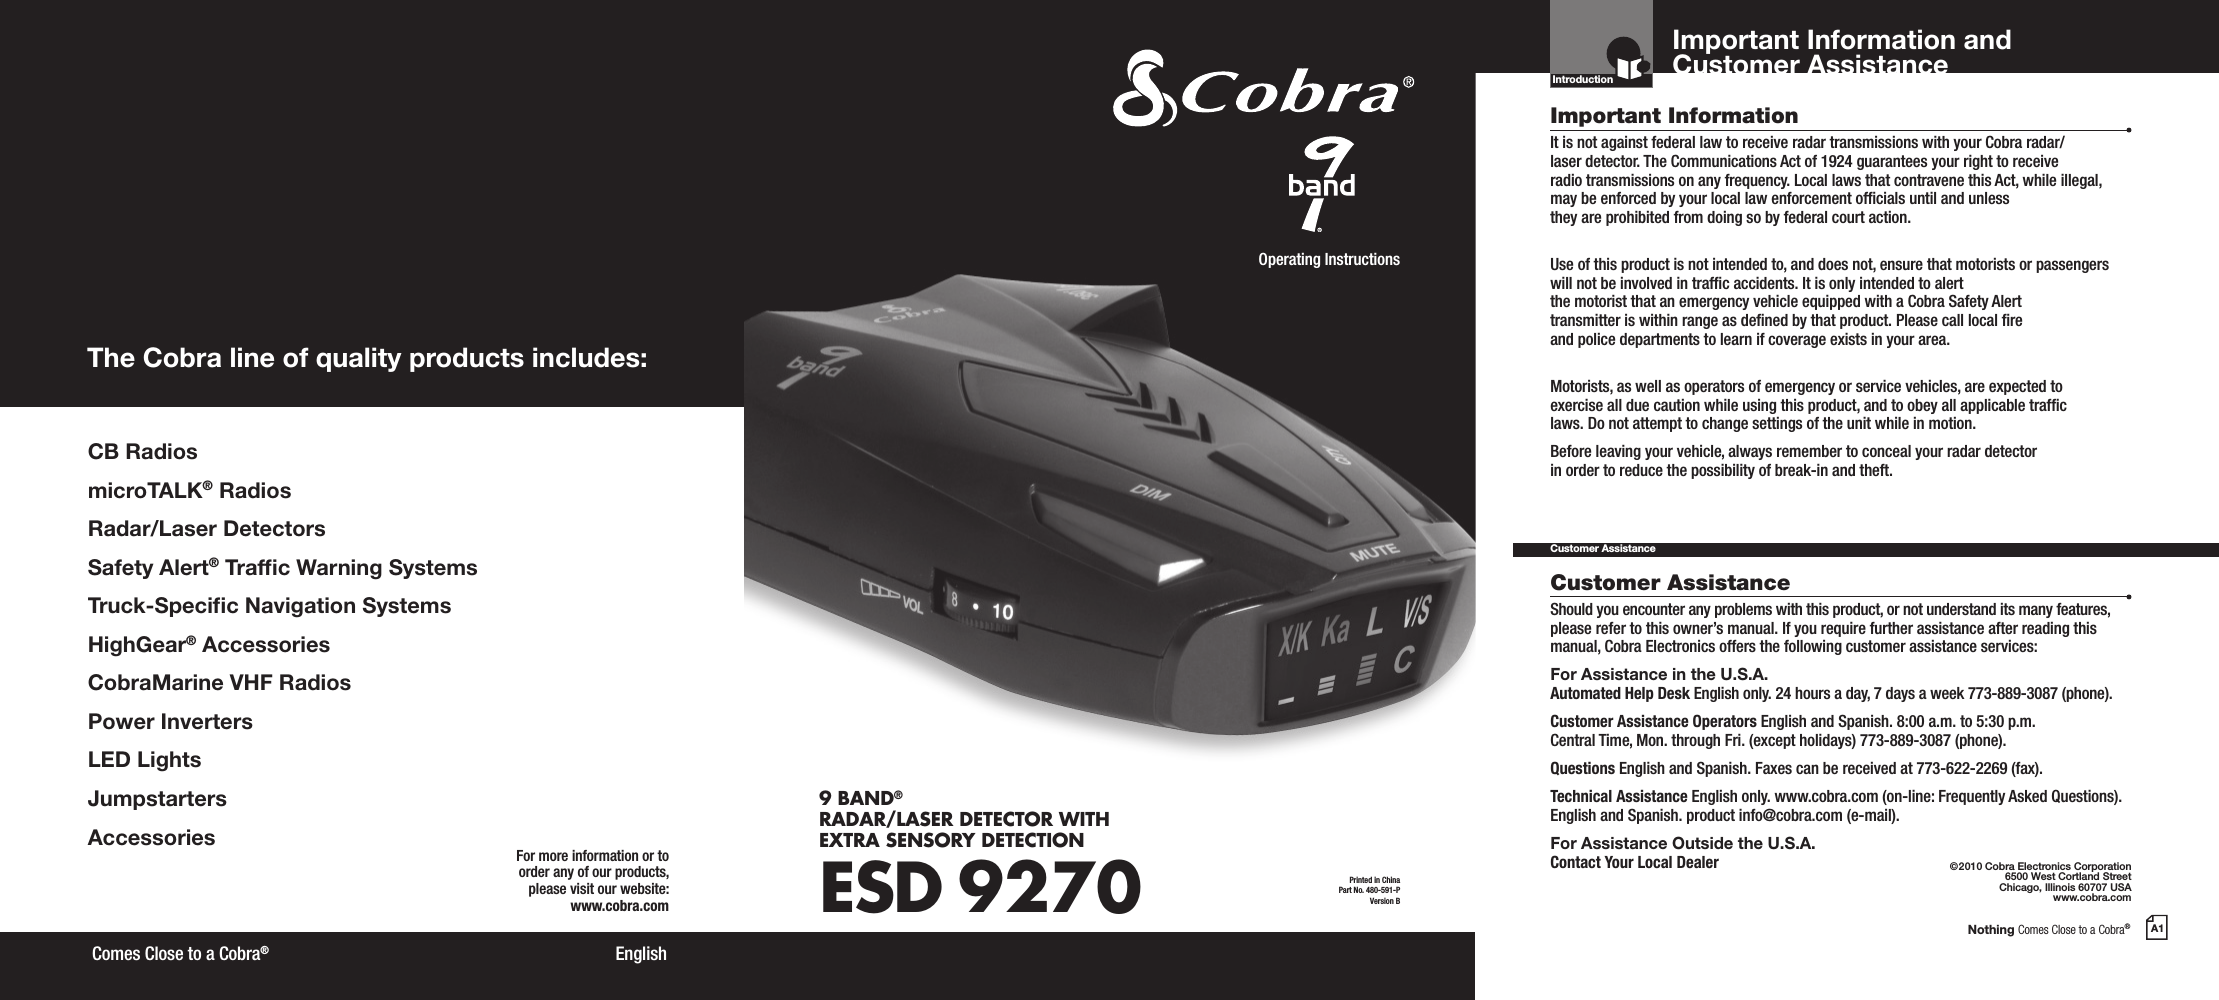 Nothing Comes Close to a Cobra®A1CB RadiosmicroTALK® RadiosRadar/Laser DetectorsSafety Alert® Trafc Warning SystemsTruck-Specic Navigation SystemsHighGear® AccessoriesCobraMarine VHF RadiosPower InvertersLED LightsJumpstarters AccessoriesThe Cobra line of quality products includes:For more information or to order any of our products, please visit our website:www.cobra.com©2010 Cobra Electronics Corporation6500 West Cortland StreetChicago, Illinois 60707 USAwww.cobra.comEnglish Comes Close to a Cobra®Important InformationCustomer AssistanceIt is not against federal law to receive radar transmissions with your Cobra radar/ laser detector. The Communications Act of 1924 guarantees your right to receive  radio transmissions on any frequency. Local laws that contravene this Act, while illegal, may be enforced by your local law enforcement ofcials until and unless  they are prohibited from doing so by federal court action.Use of this product is not intended to, and does not, ensure that motorists or passengers will not be involved in trafc accidents. It is only intended to alert  the motorist that an emergency vehicle equipped with a Cobra Safety Alert  transmitter is within range as dened by that product. Please call local re  and police departments to learn if coverage exists in your area.Motorists, as well as operators of emergency or service vehicles, are expected to exercise all due caution while using this product, and to obey all applicable trafc  laws. Do not attempt to change settings of the unit while in motion.Before leaving your vehicle, always remember to conceal your radar detector  in order to reduce the possibility of break-in and theft.Should you encounter any problems with this product, or not understand its many features, please refer to this owner’s manual. If you require further assistance after reading this manual, Cobra Electronics offers the following customer assistance services:For Assistance in the U.S.A. Automated Help Desk English only. 24 hours a day, 7 days a week 773-889-3087 (phone).Customer Assistance Operators English and Spanish. 8:00 a.m. to 5:30 p.m. Central Time, Mon. through Fri. (except holidays) 773-889-3087 (phone).Questions English and Spanish. Faxes can be received at 773-622-2269 (fax).Technical Assistance English only. www.cobra.com (on-line: Frequently Asked Questions). English and Spanish. product info@cobra.com (e-mail).For Assistance Outside the U.S.A.  Contact Your Local DealerCustomer AssistanceImportant Information and Customer AssistanceIntroductionPrinted in China Part No. 480-591-PVersion BOperating Instructions9 BAND® RADAR/LASER DETECTOR WITH EXTRA SENSORY DETECTIONESD 9270